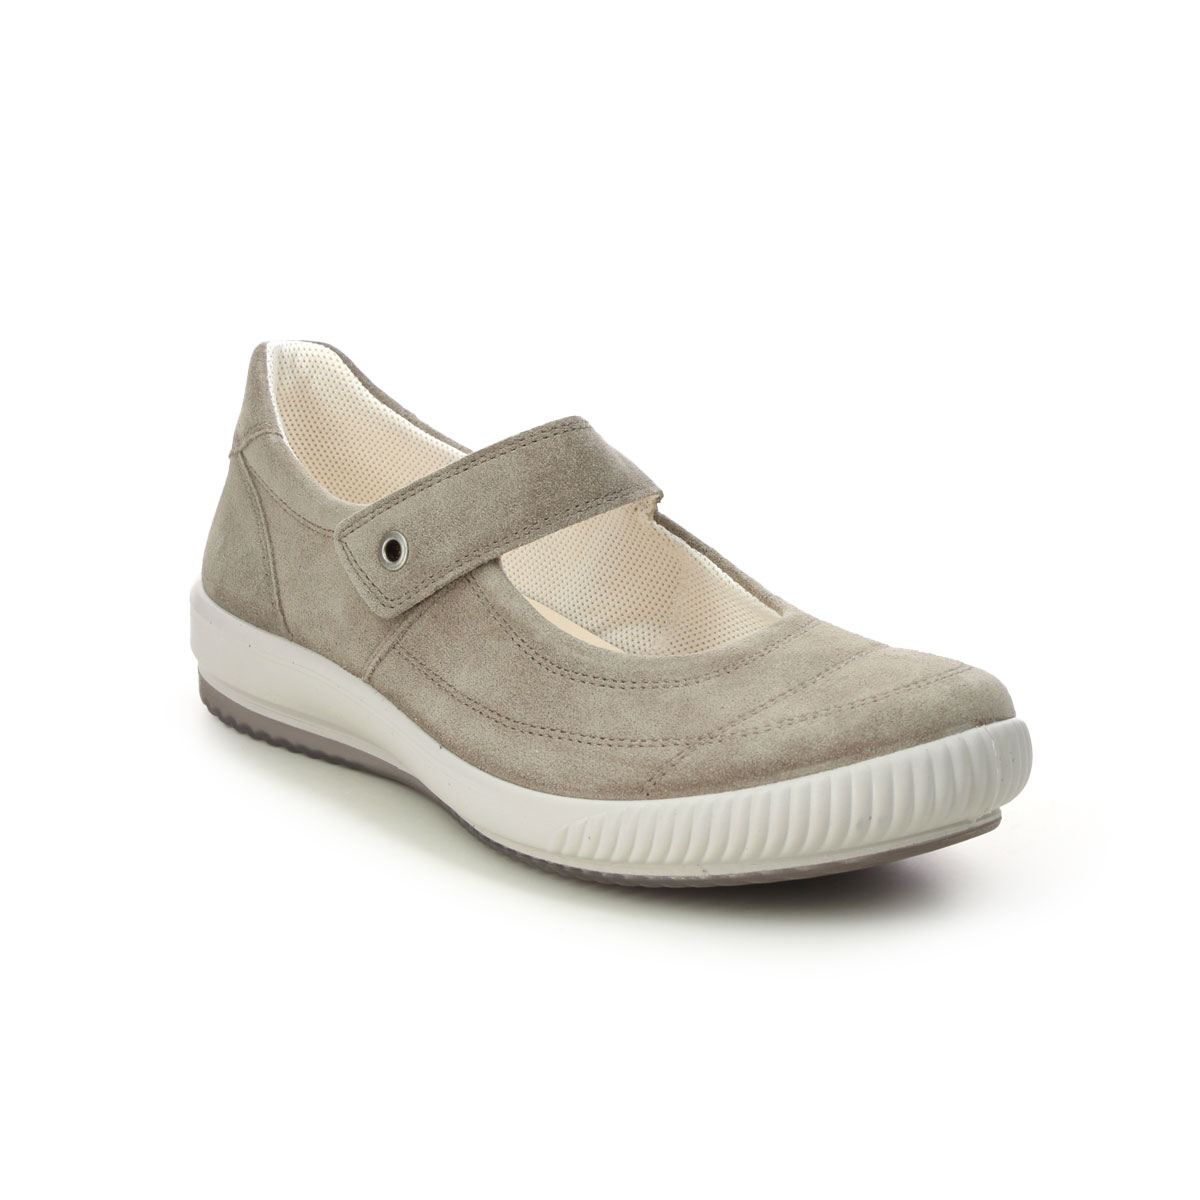 Legero Tanaro Bar Beige suede Womens Mary Jane Shoes 2000300-4500 in a Plain Leather in Size 6